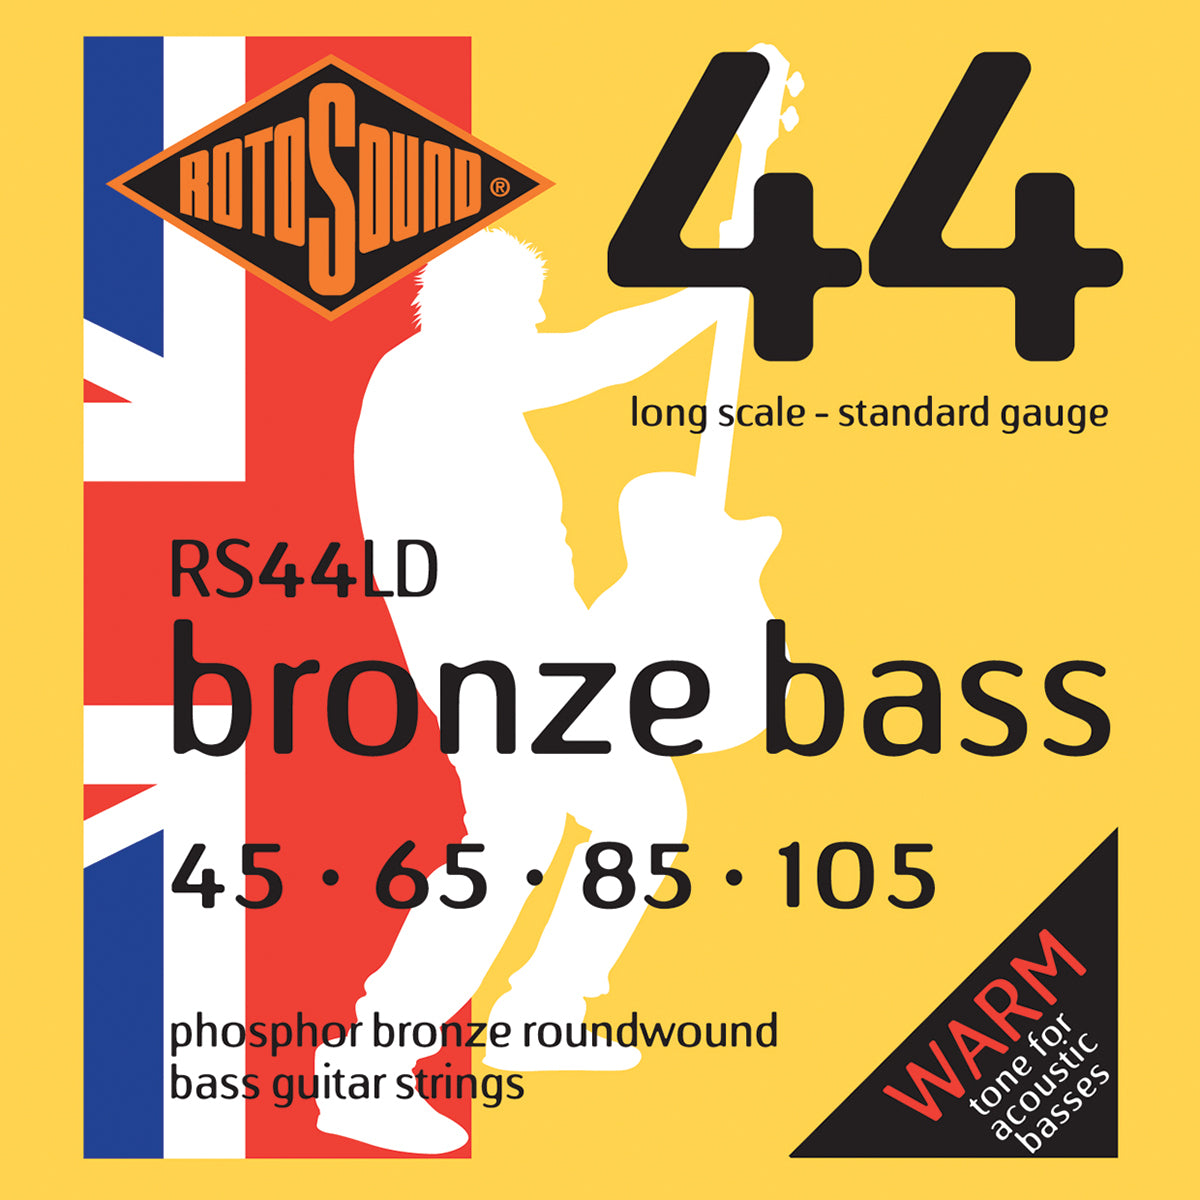 Acoustic Bass Strings - Rotosound RS44LD Bronze Bass 45-105 Strings